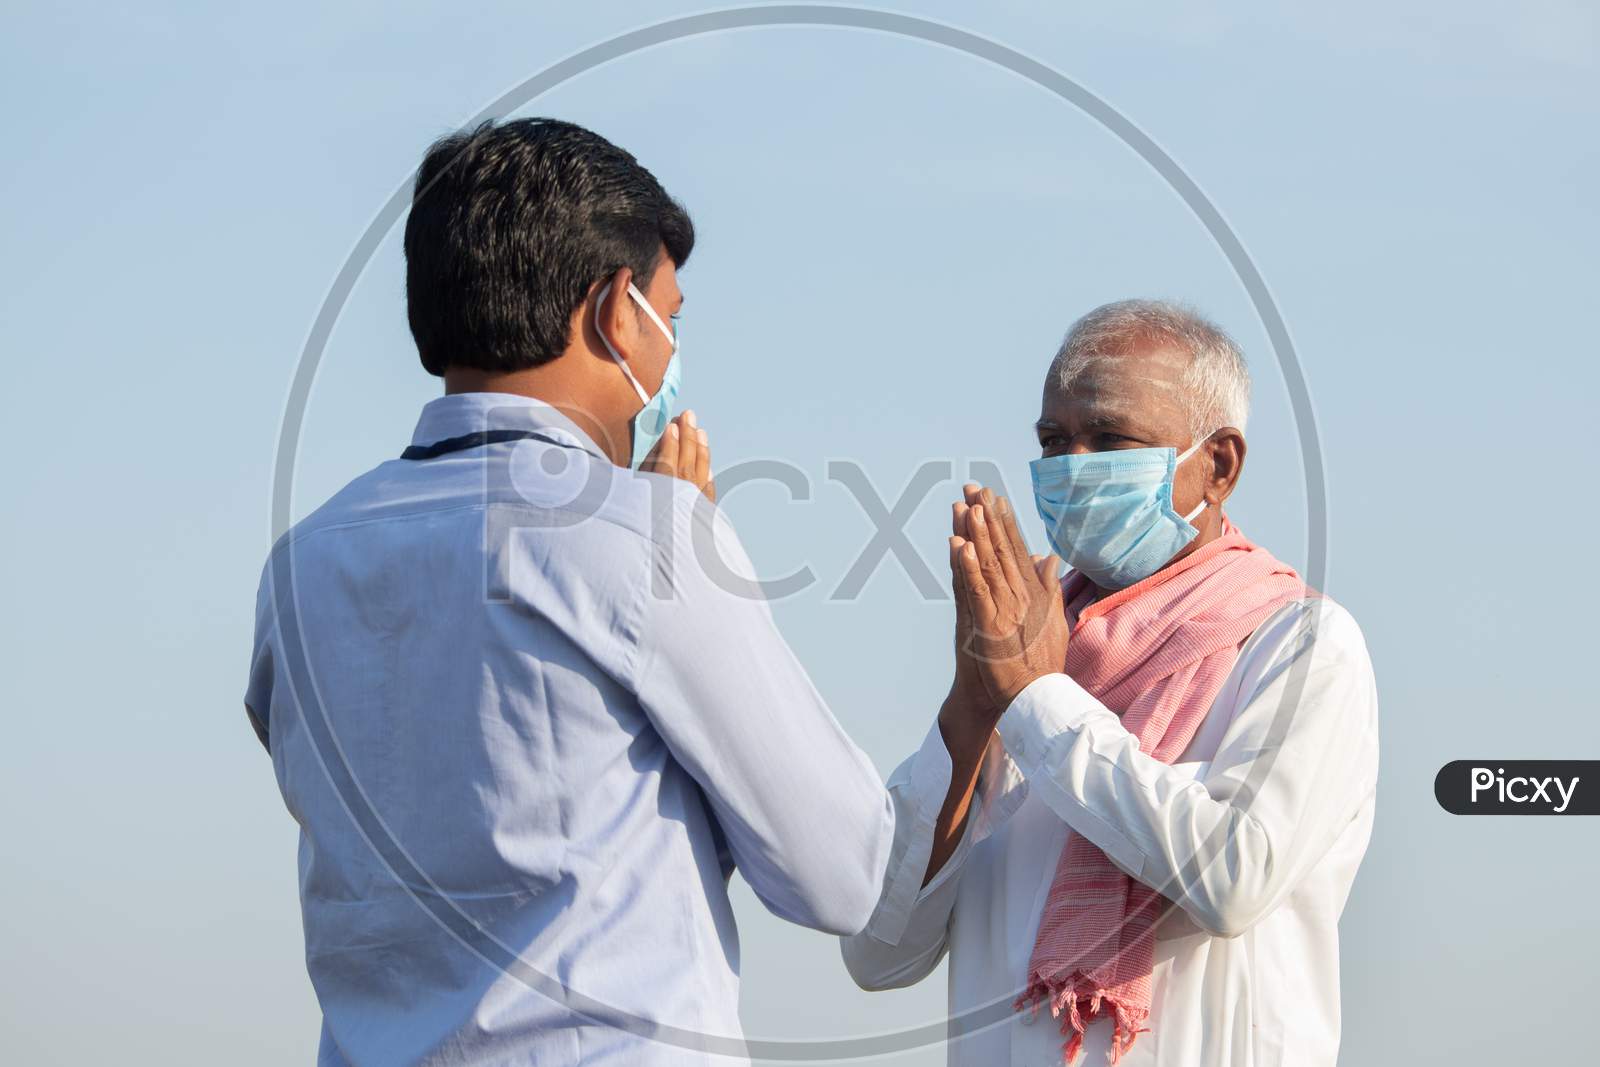 Low Angle View, Farmer Greeting To Banker Or Corporate Government Officer By Doing Namaste While Both Worn Face Mask Due To Coronavirus Covid-19 Pandemic Meeting Near Agriculture Farmland.